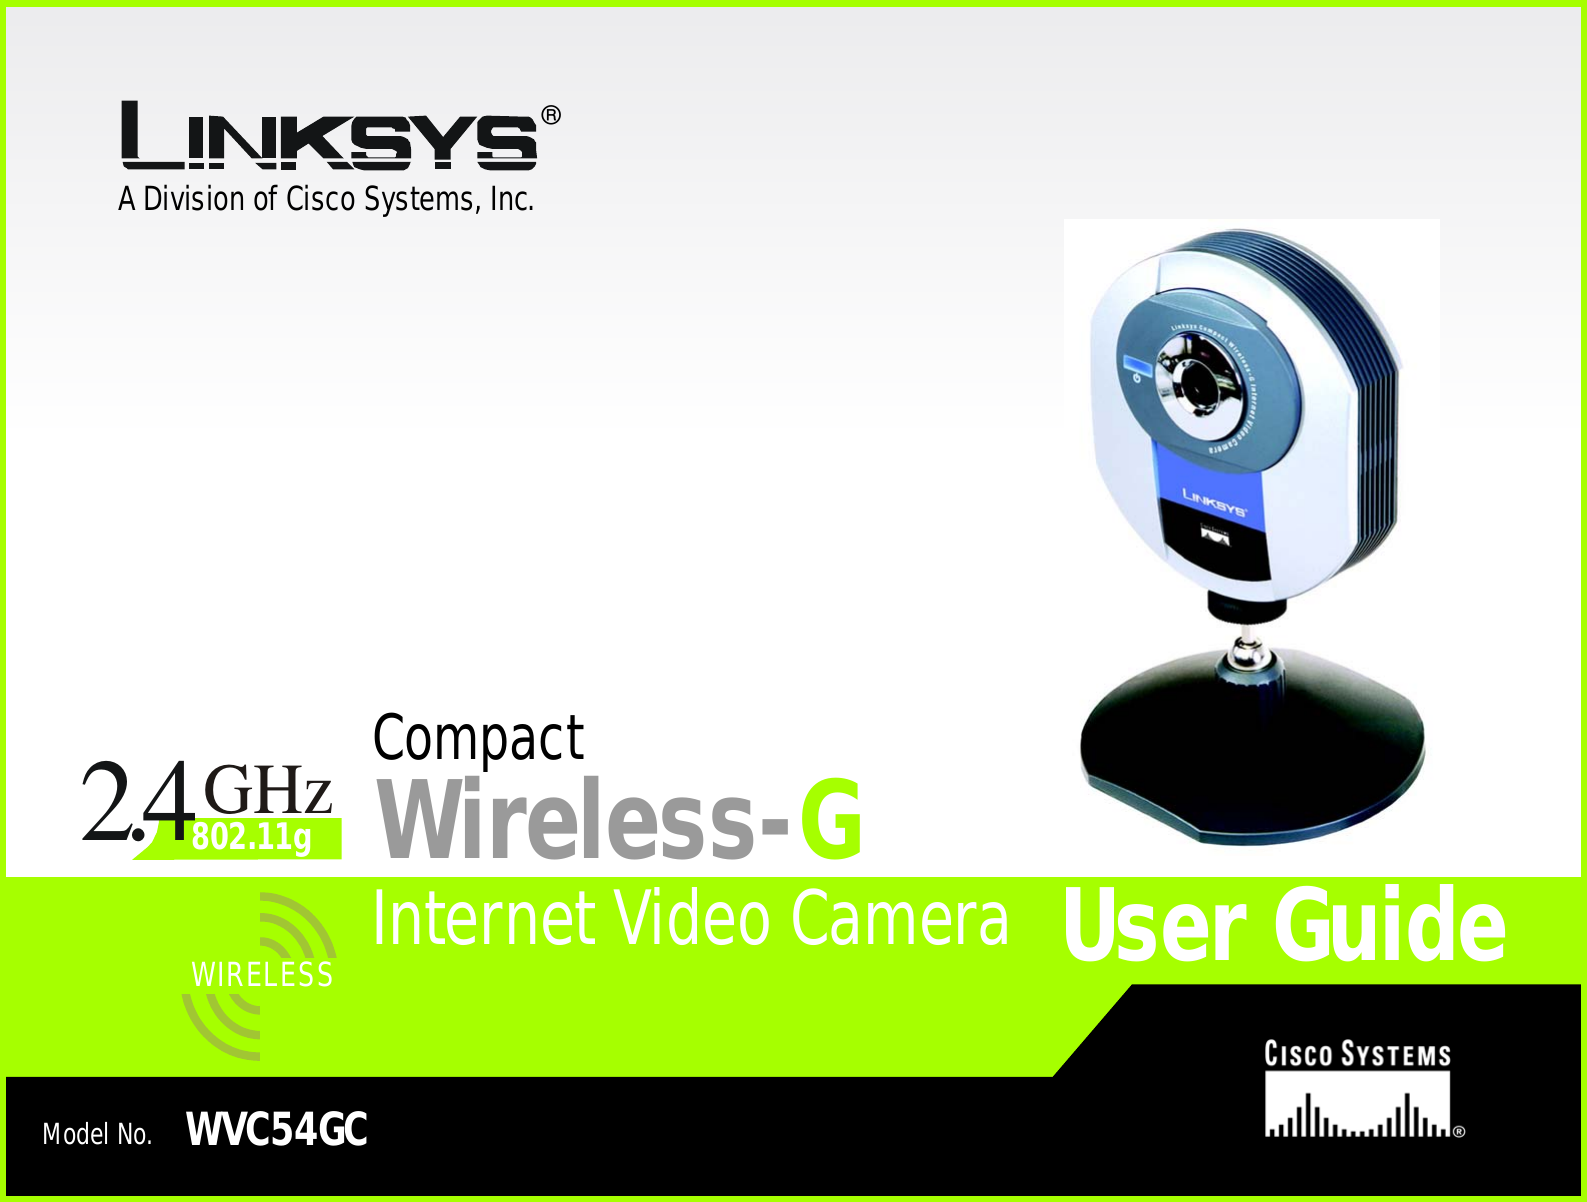 A Division of Cisco Systems, Inc.®Model No.Internet Video CameraWireless-GWVC54GCUser GuideWIRELESSGHz2.4802.11gCompact